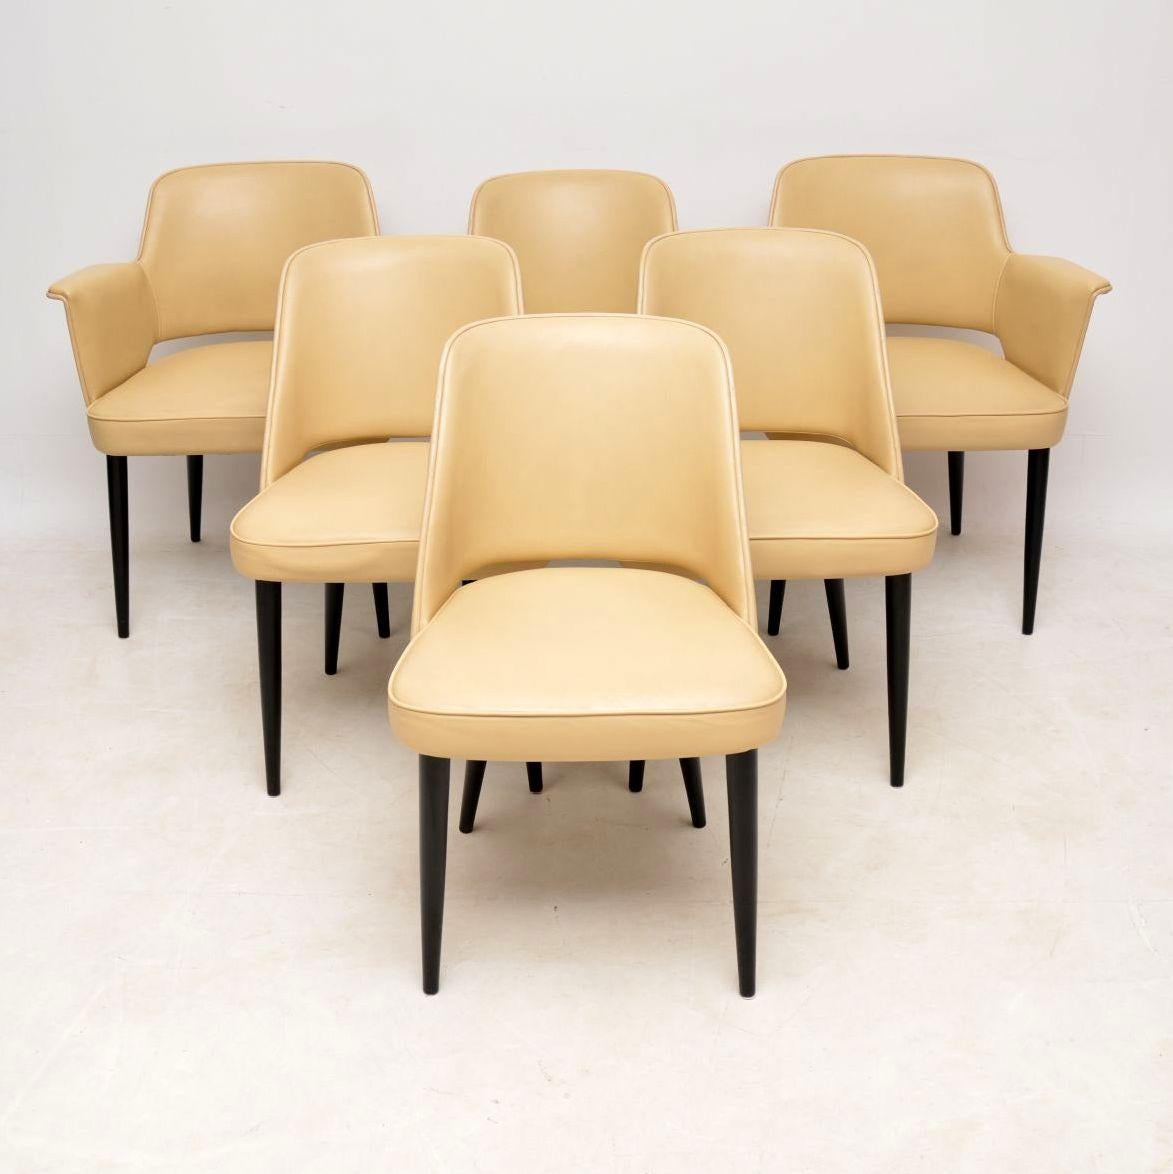 An exceptionally rare and high quality dining table and chairs, this was designed by Robin Day and made by Hille in the 1950-60’s.

The chair model is called the ‘Stamford’ chair, they are all upholstered in cream leather with ebonised wooden